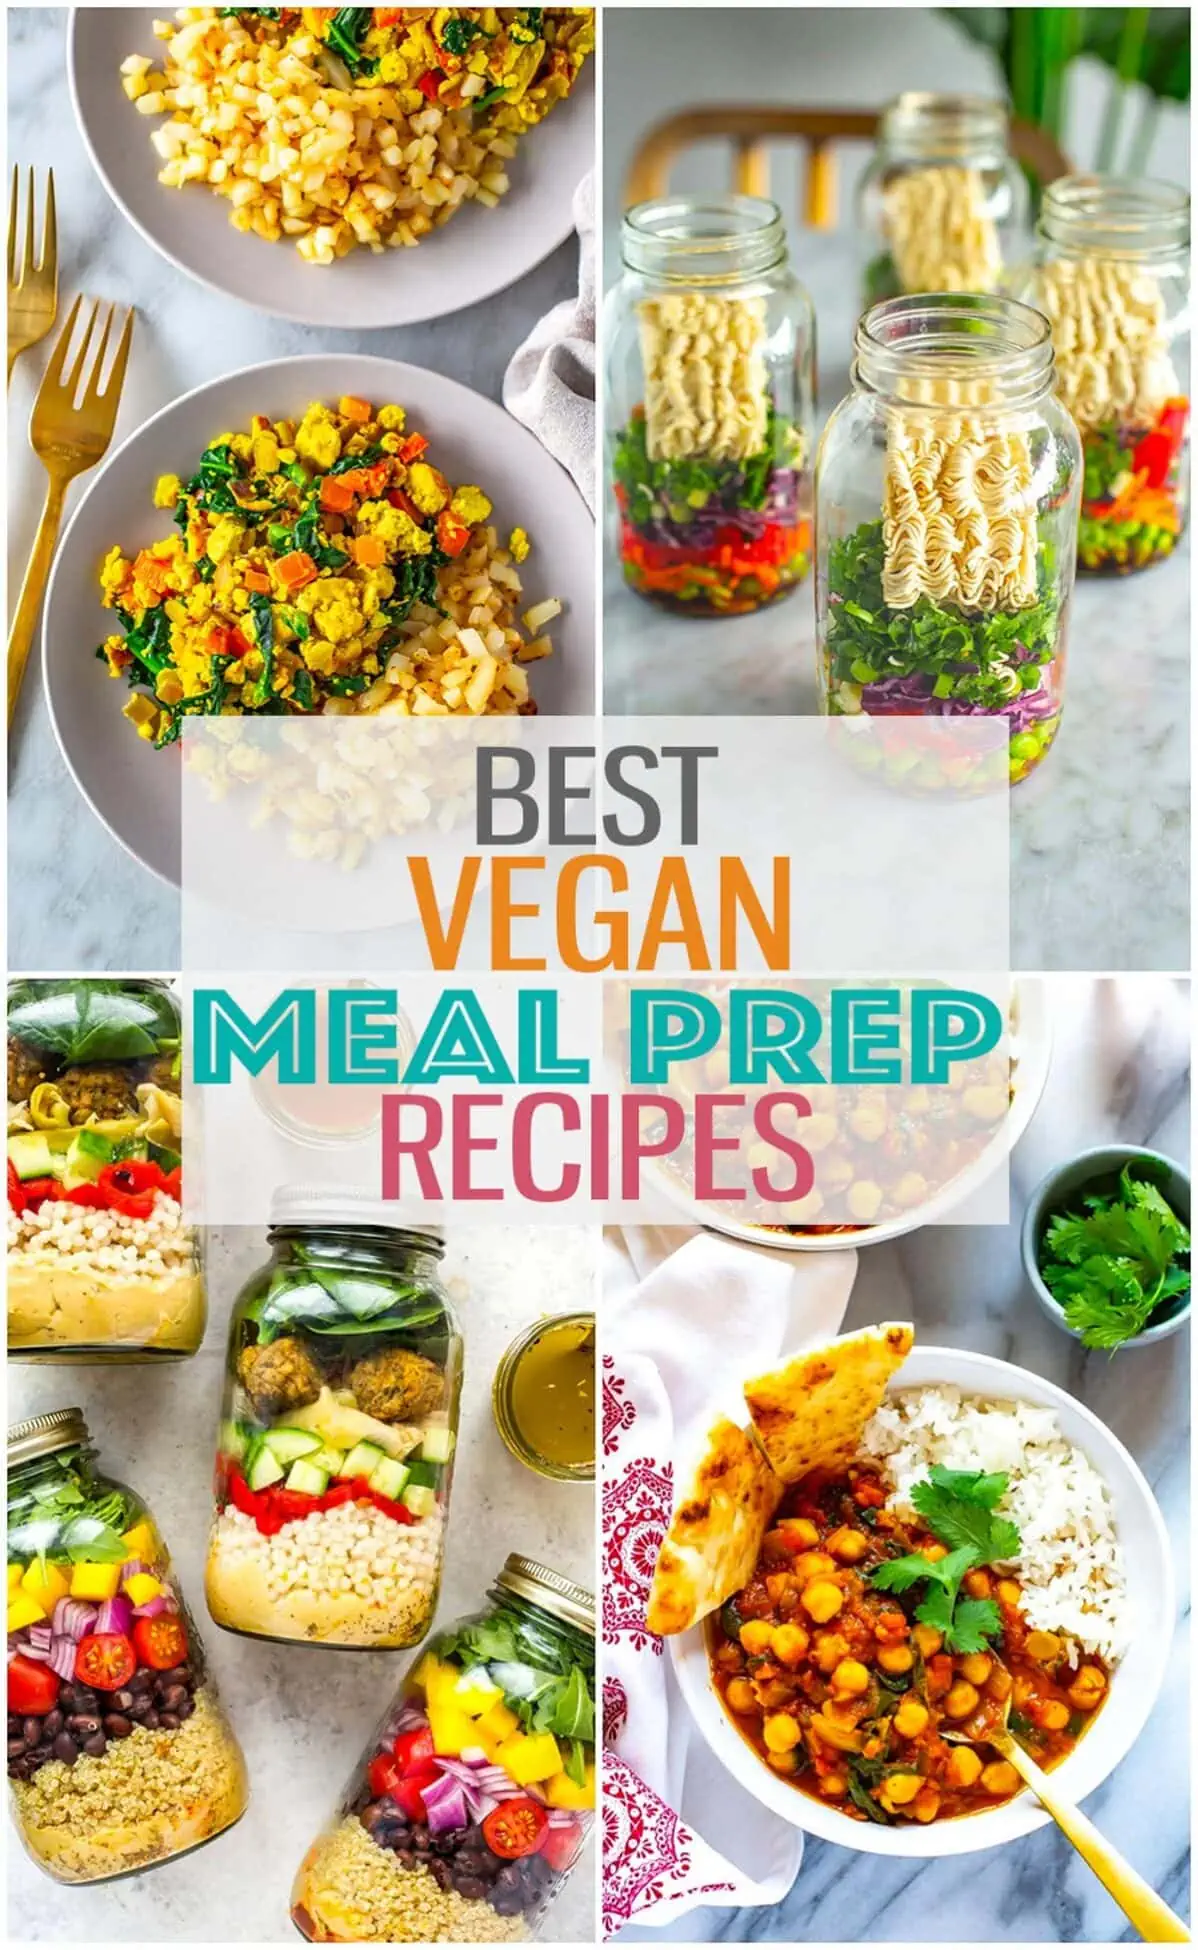 A collage of 4 different vegan meal prep ideas with the text "Best Vegan Meal Prep Recipes" layered over top.